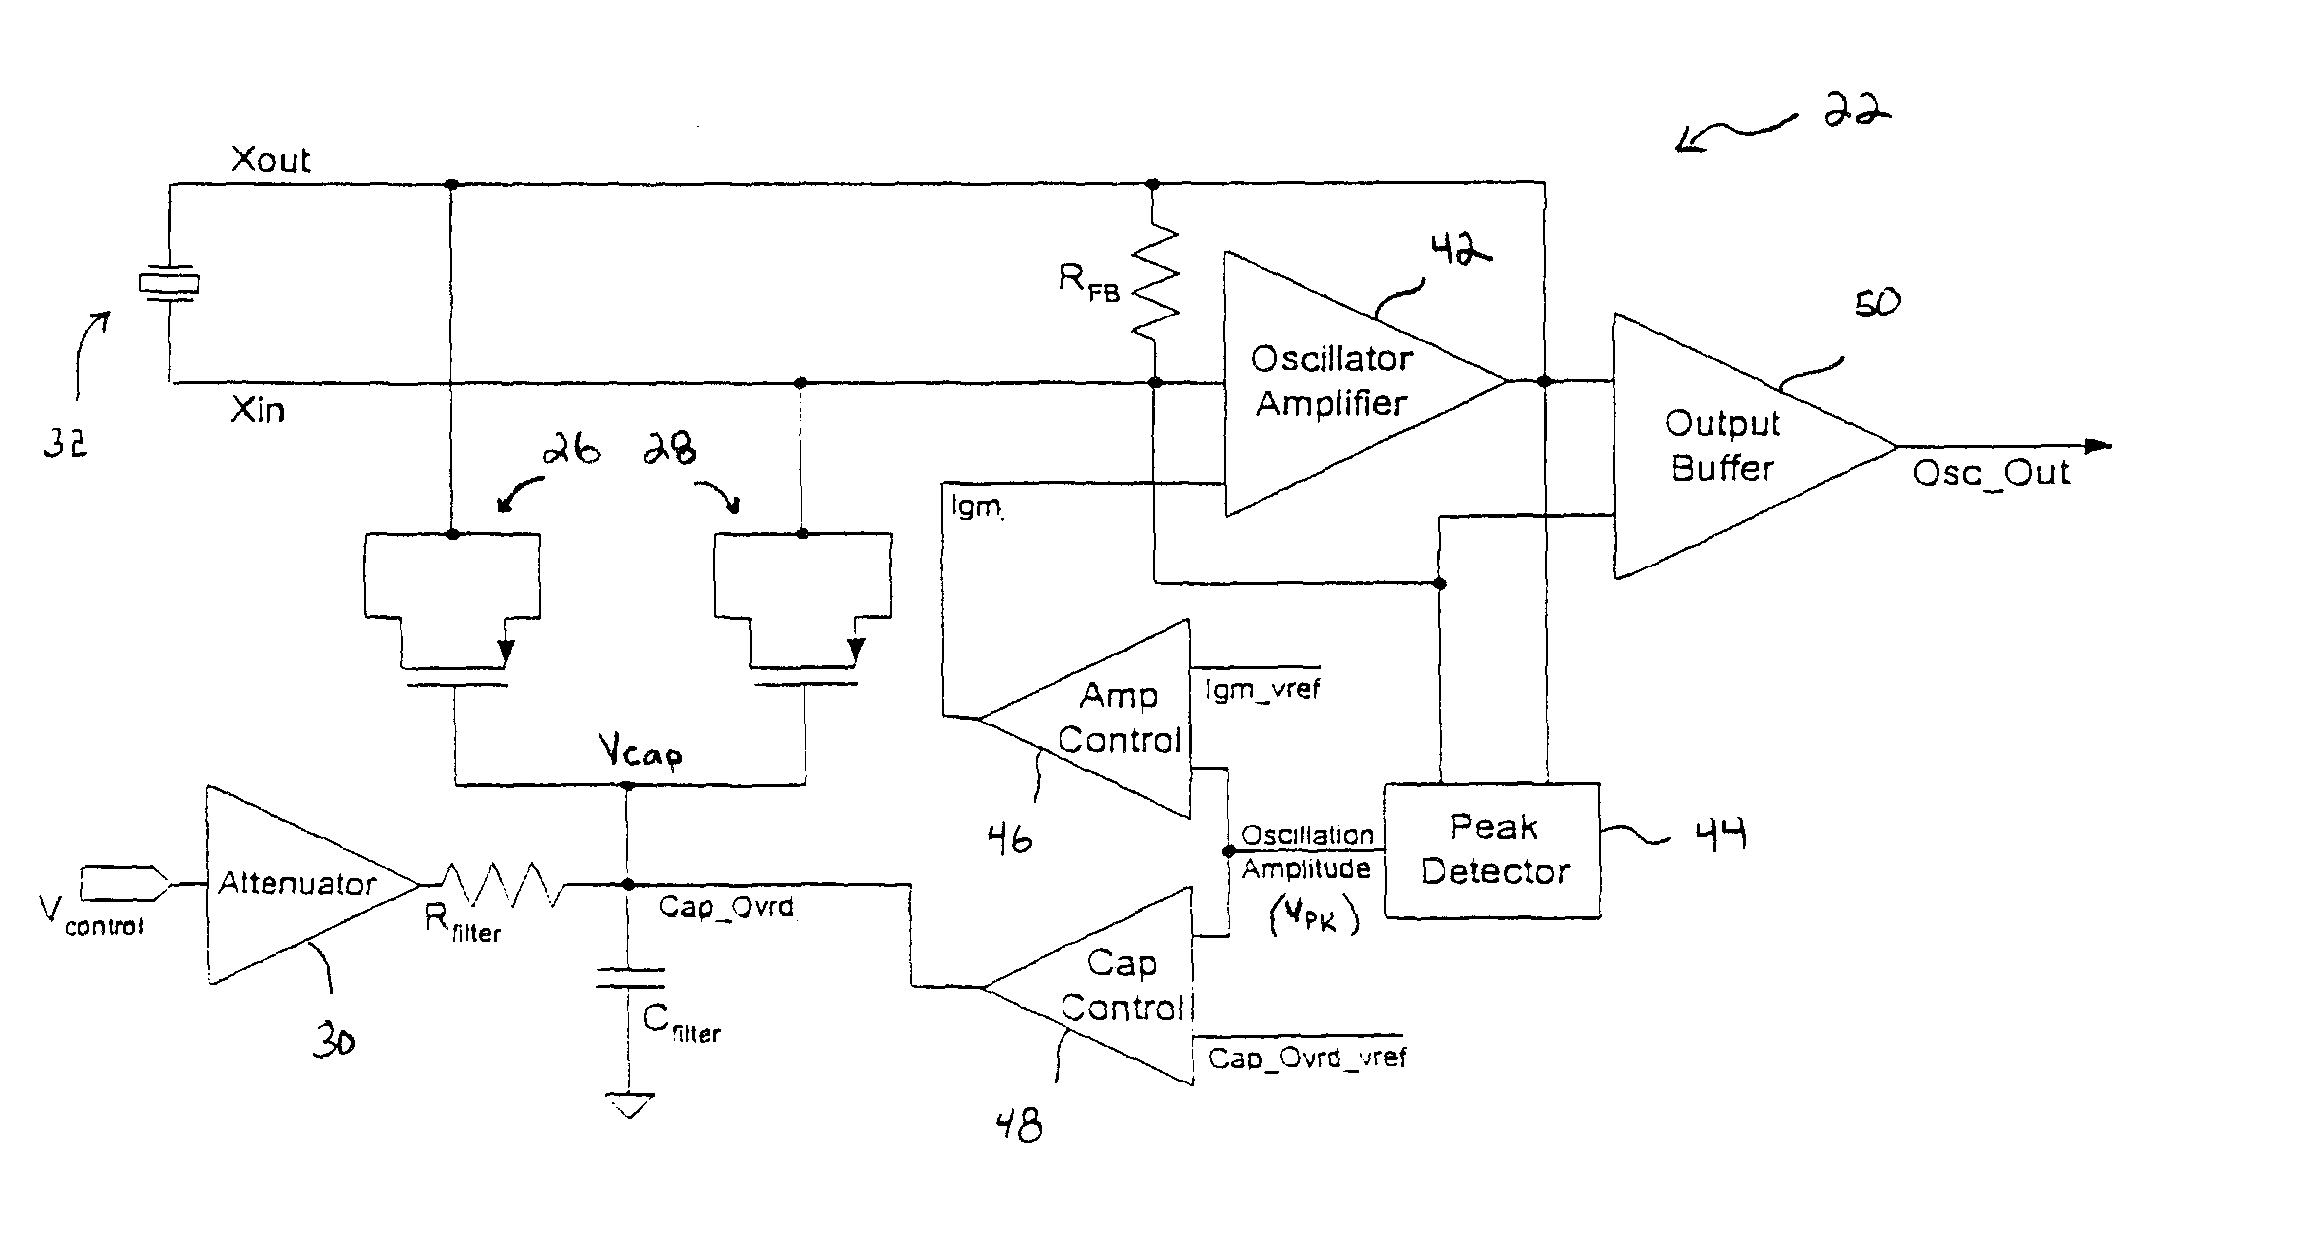 Regulated capacitive loading and gain control of a crystal oscillator during startup and steady state operation